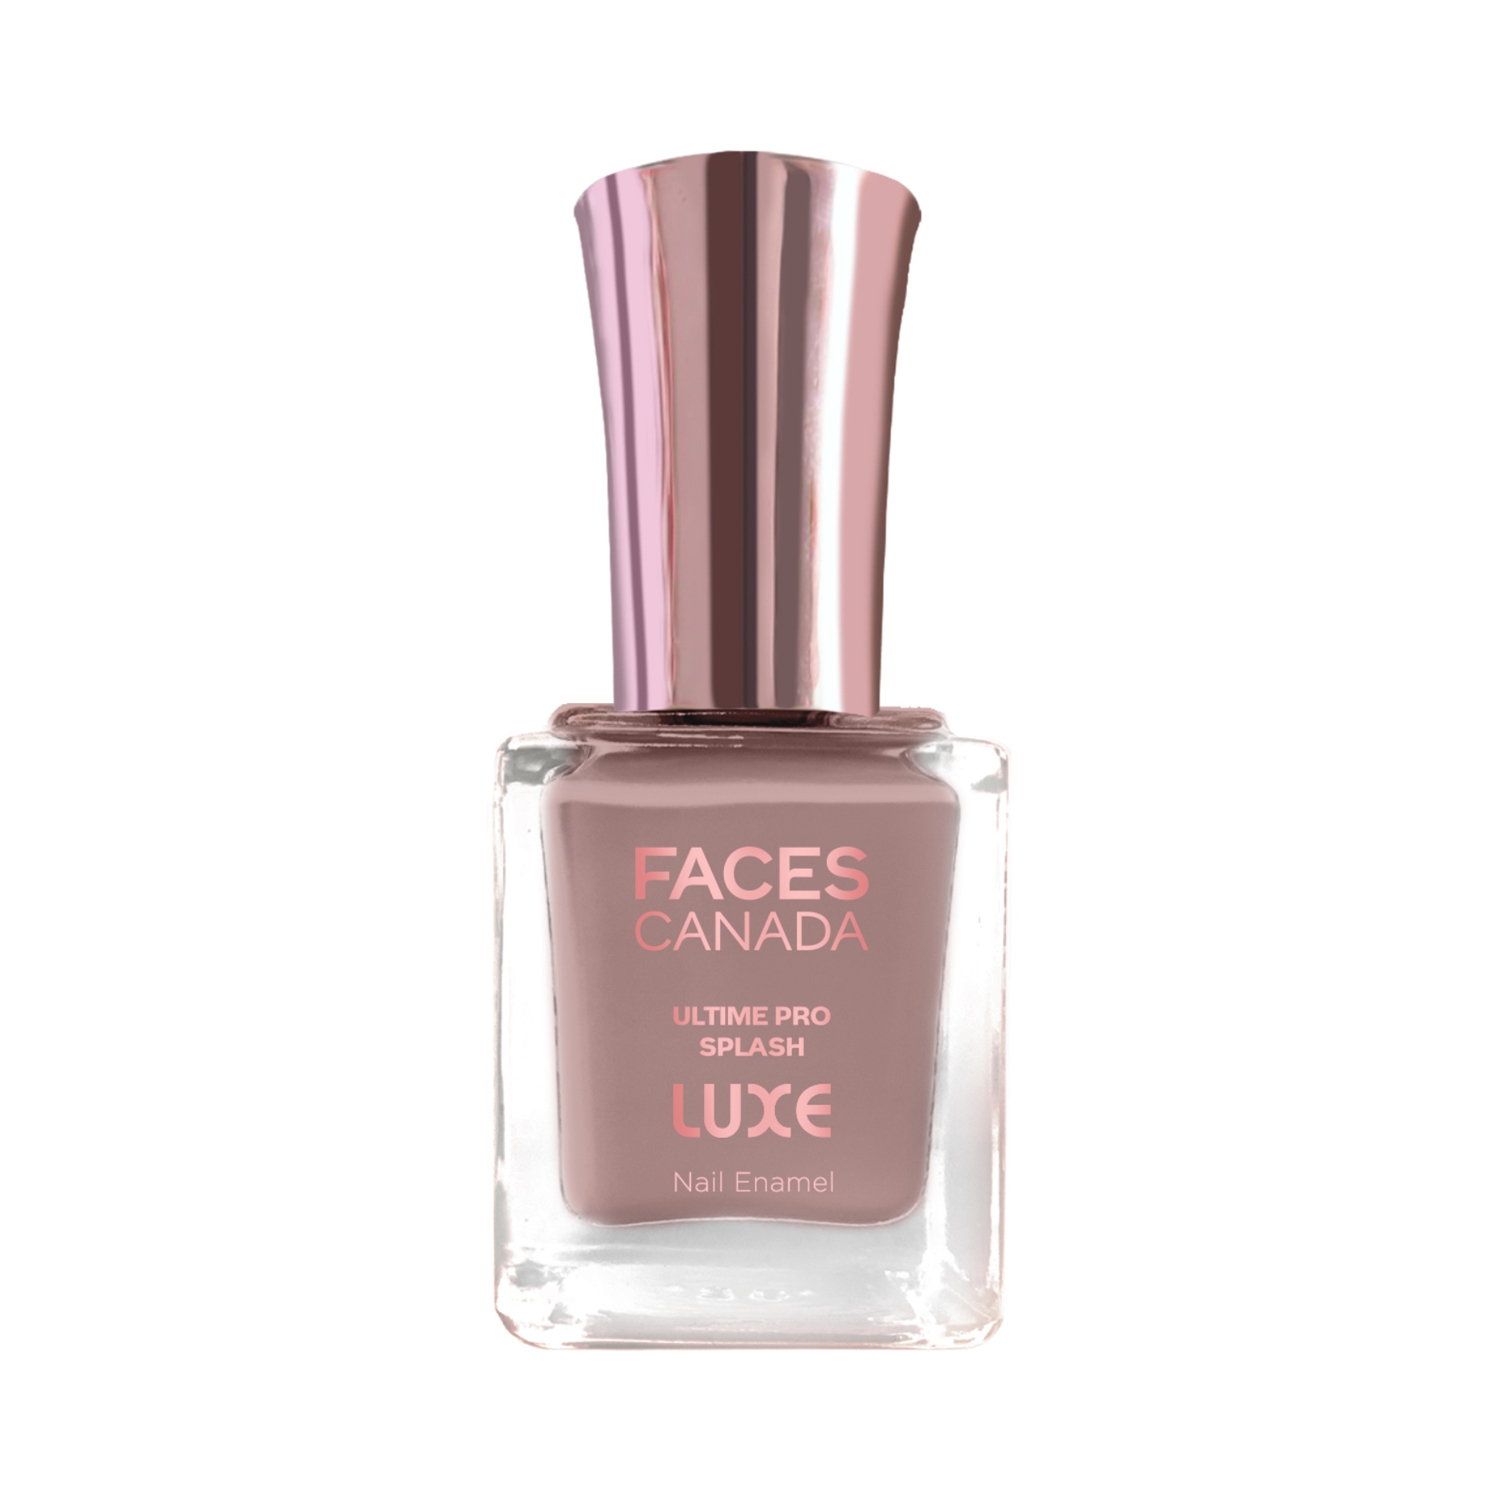 Faces Canada | Faces Canada Ultime Pro Splash Luxe Nail Enamel - L12 Salted Caramel (12ml)